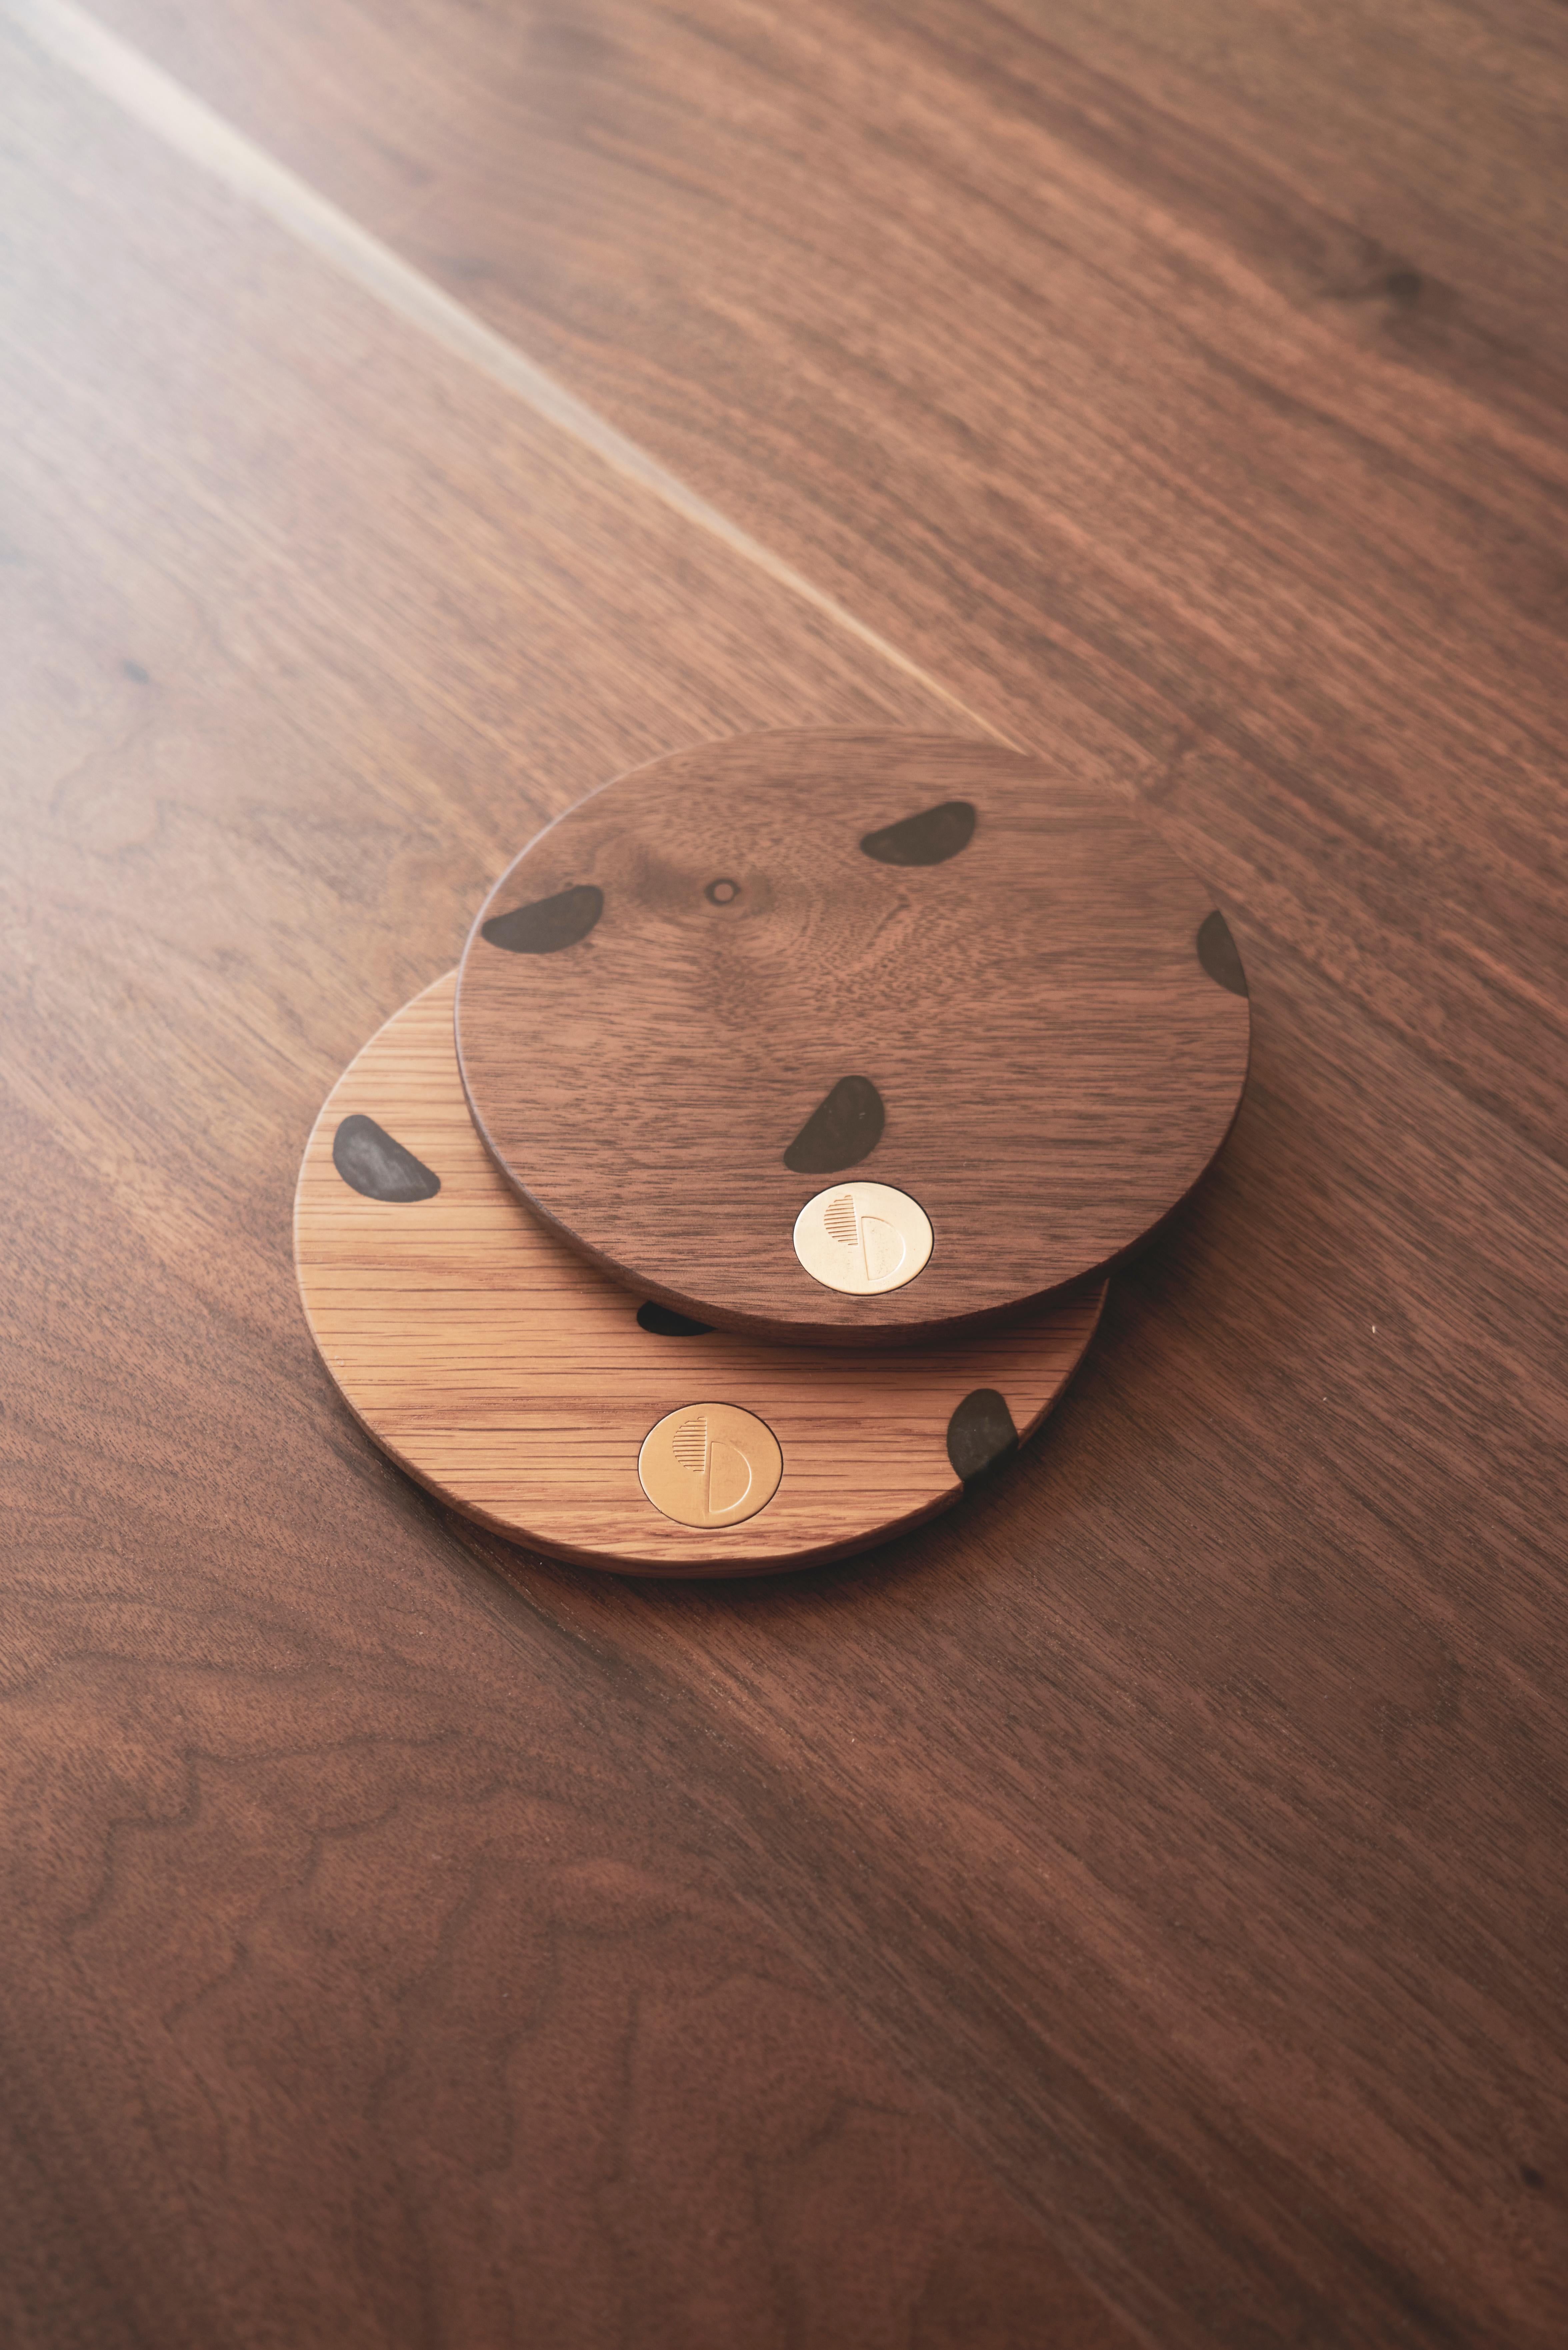 Materials : 
Solid White Oak / Solid Walnut 
Black poxy
Solid brass logo plate
Size[inch] : Diameter 6”x Tall 3/8”.